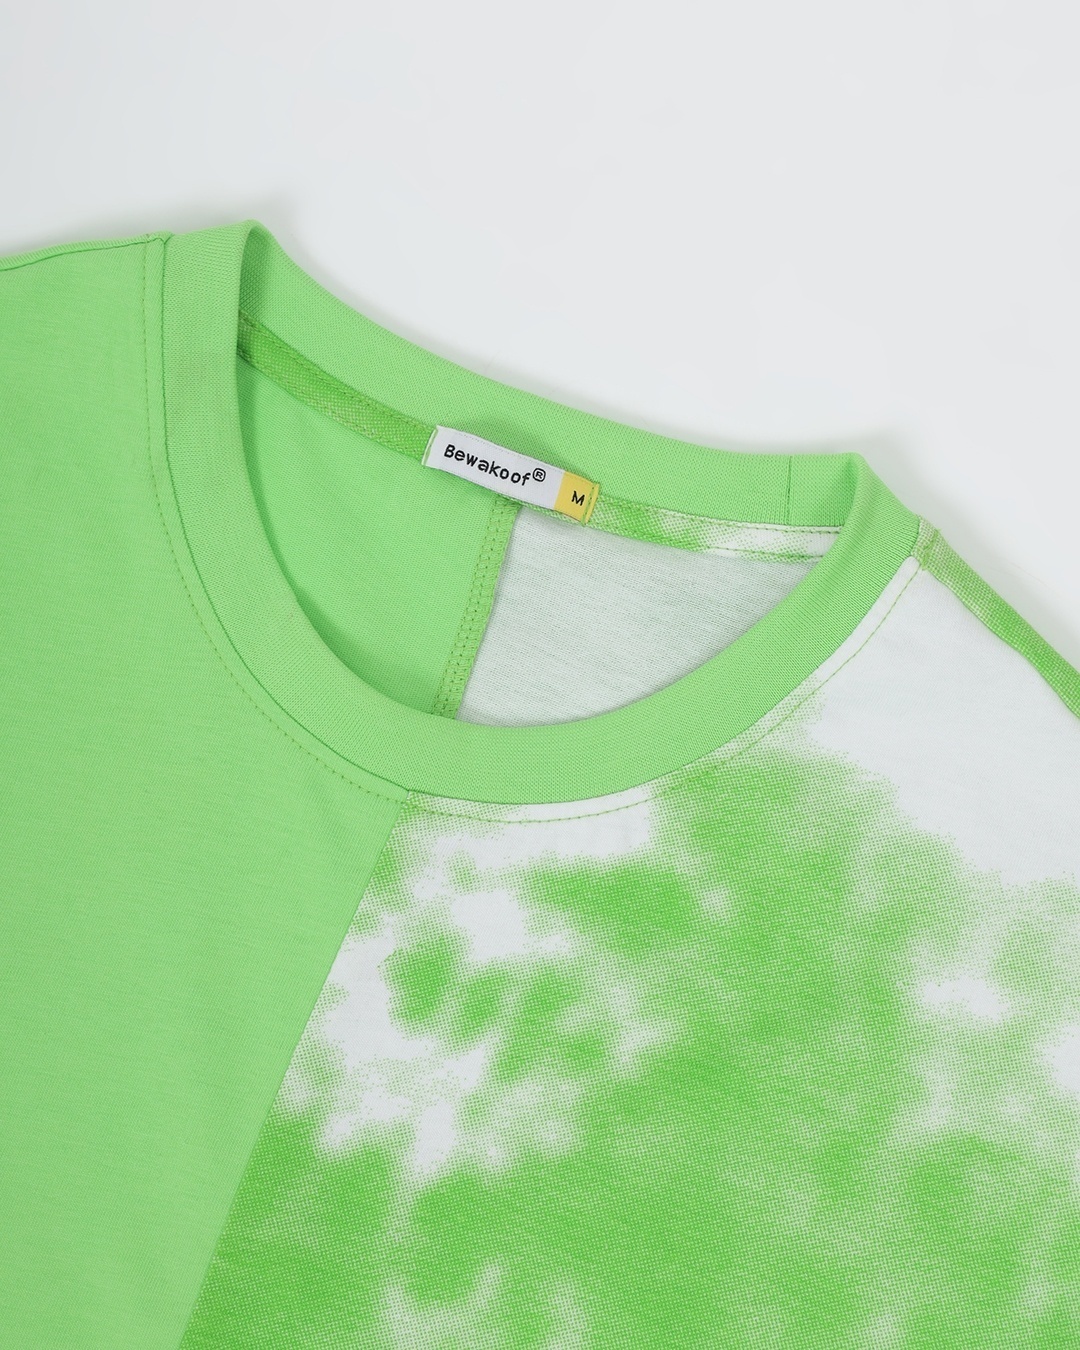 Shop Chilled Out Green Half & Half Tie & Dye T-shirt